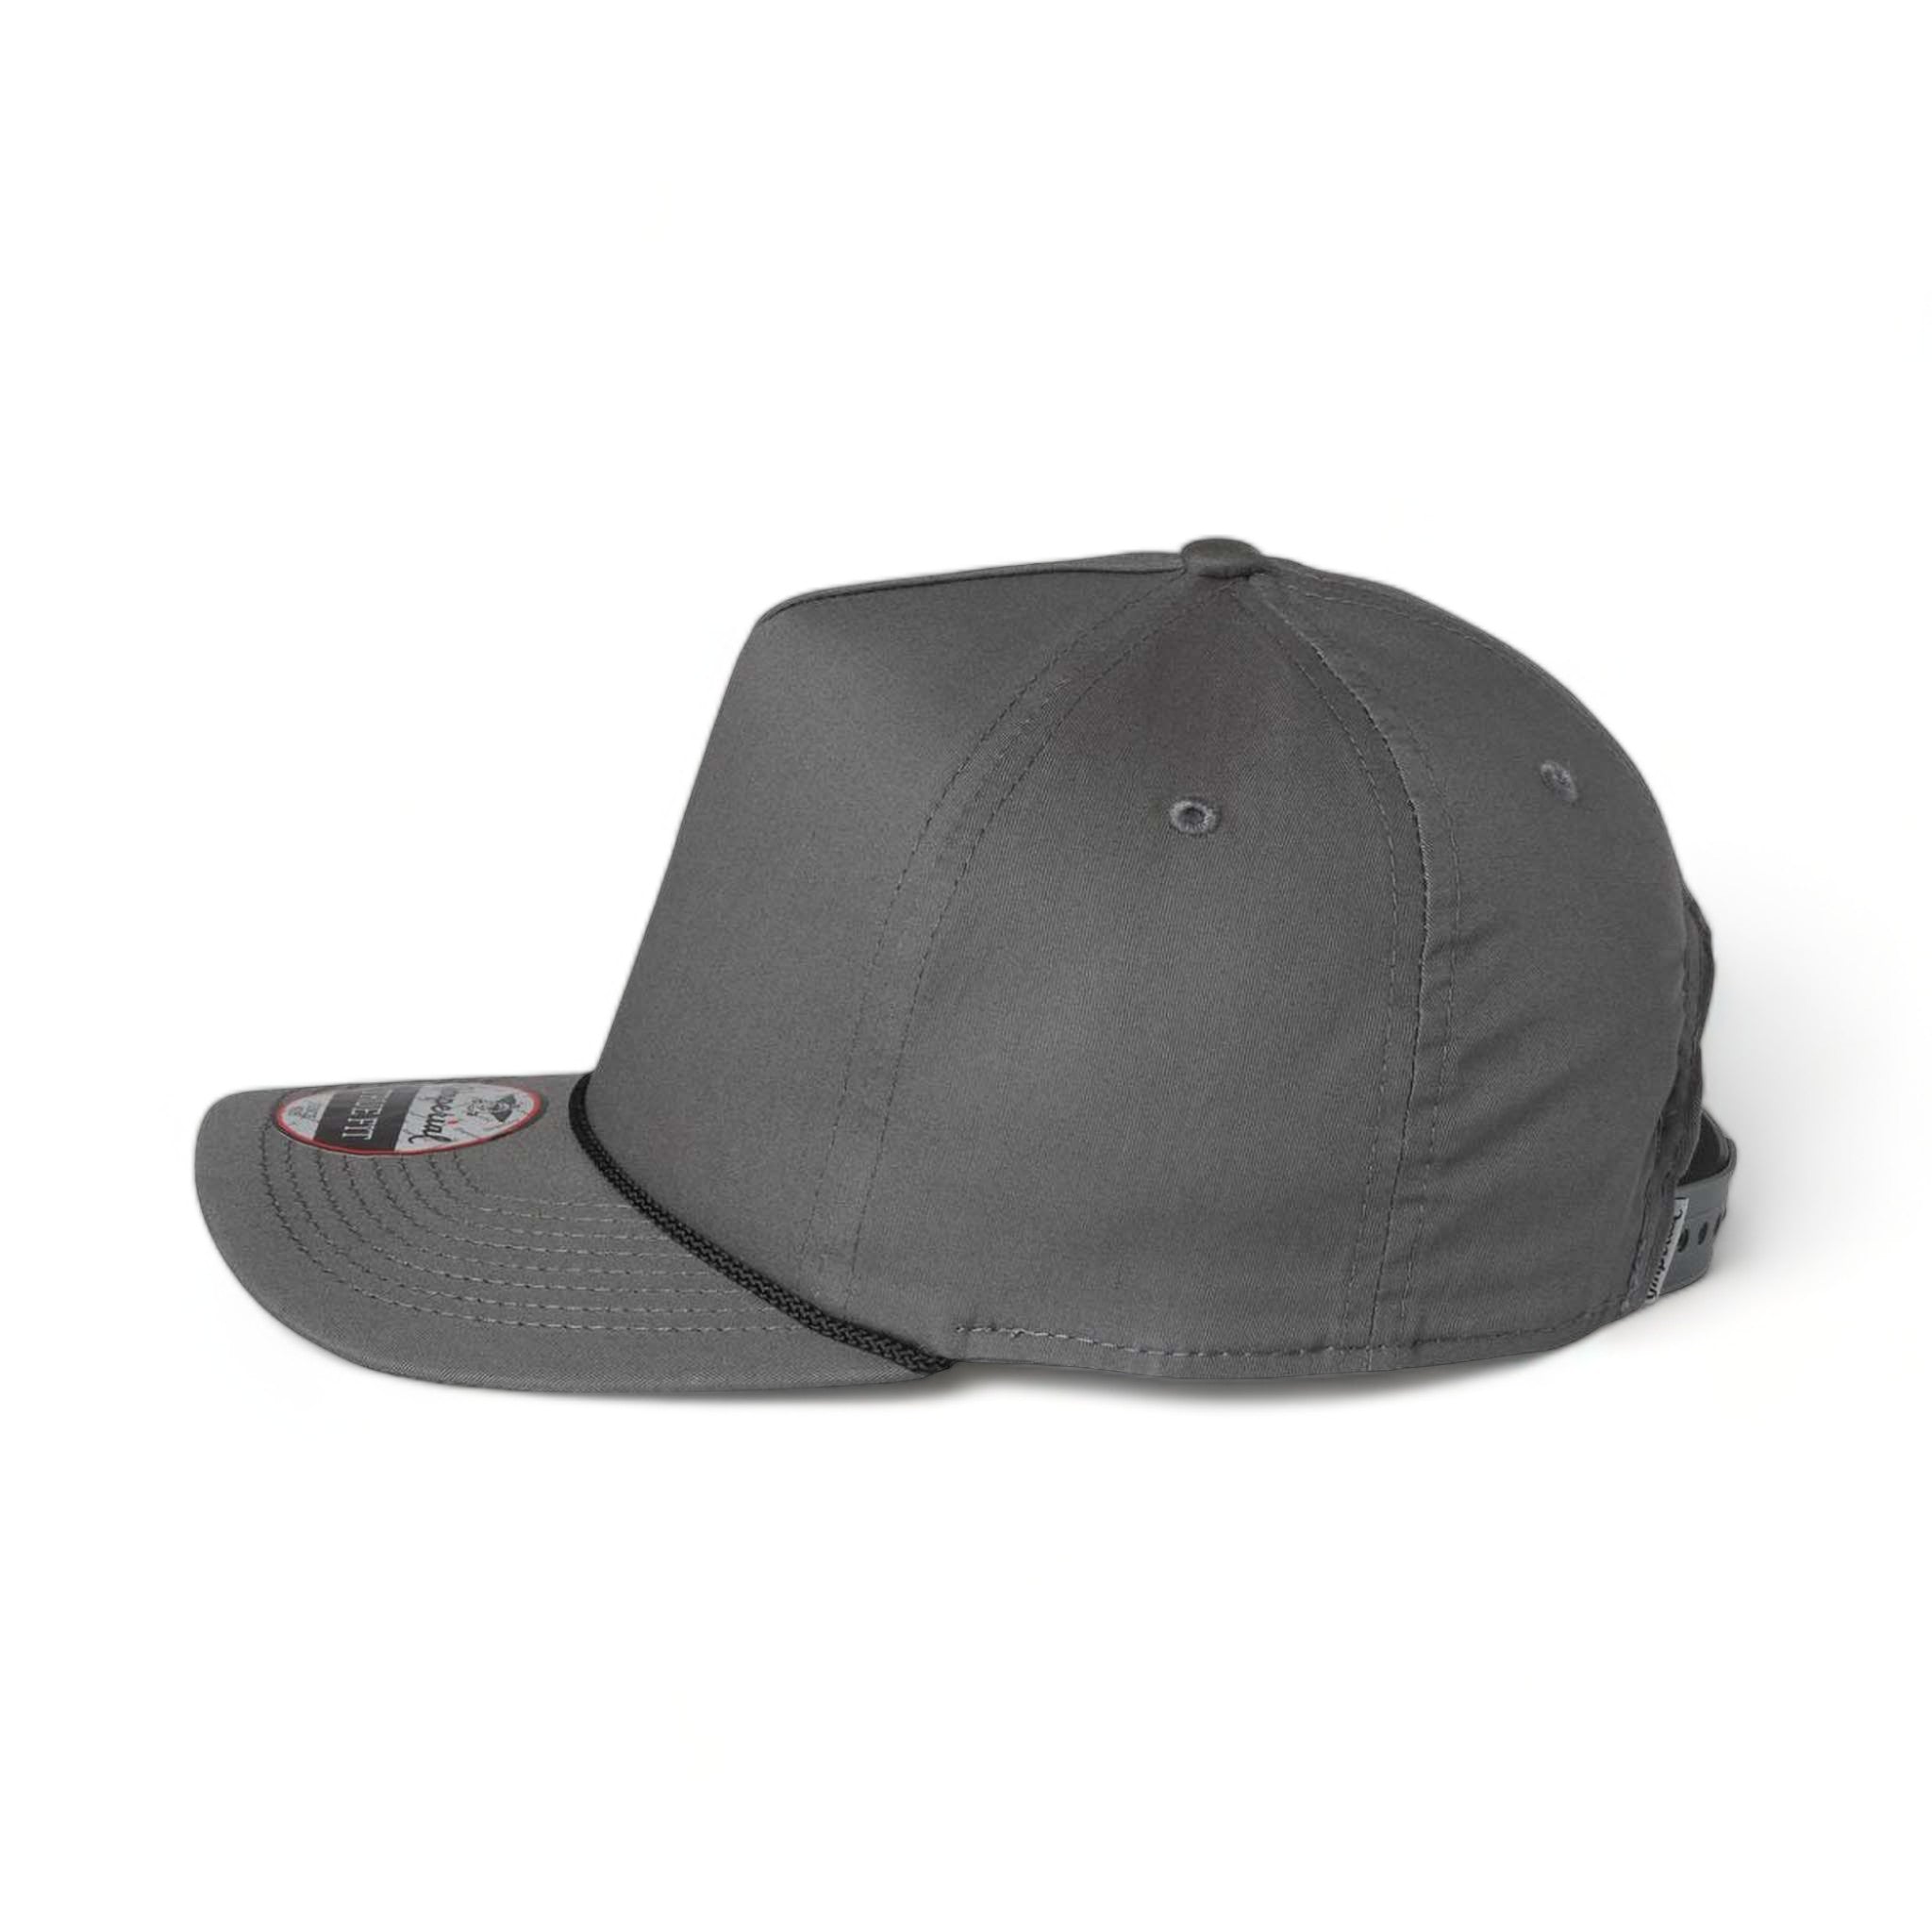 Side view of Imperial 5056 custom hat in graphite and black